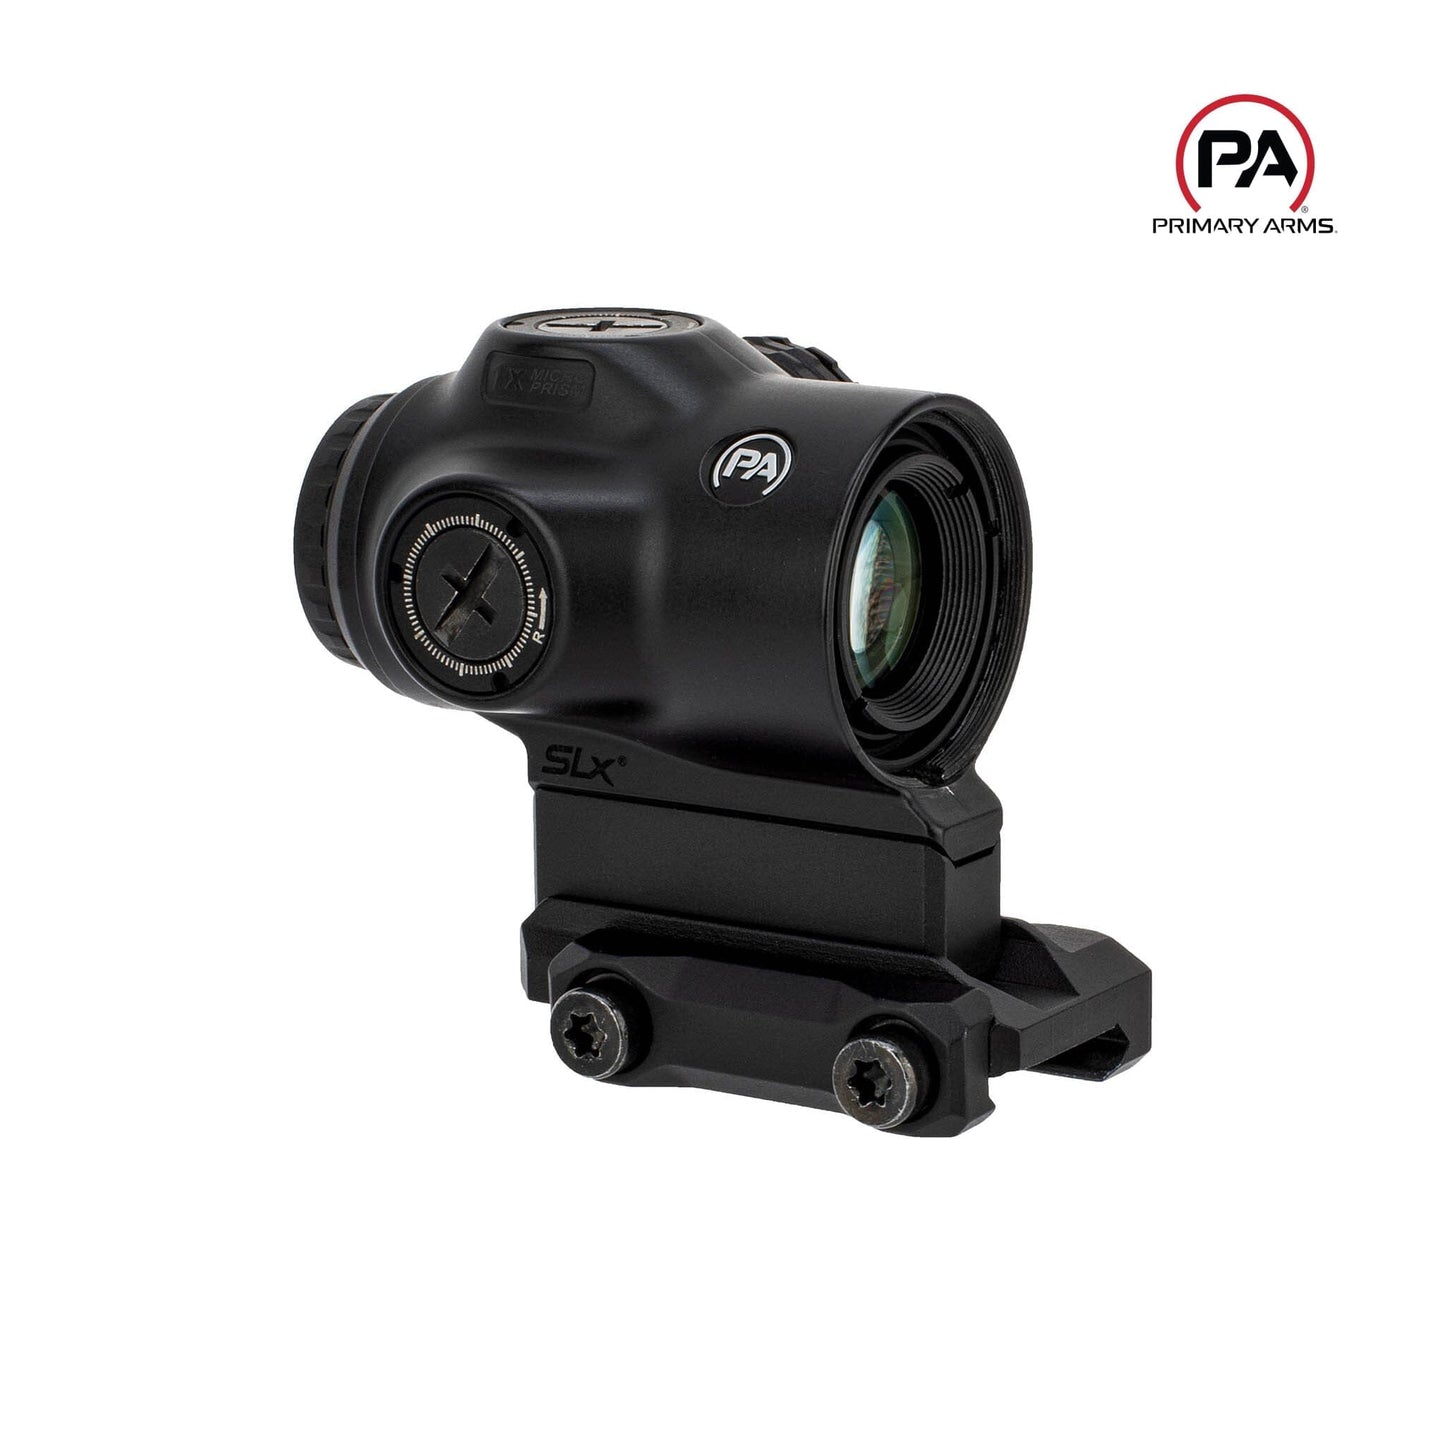 Primary Arms SLx 1X MicroPrism Scope - Red ACSS Gemini 9mm Reticle Prism Rifle Scope Primary Arms 